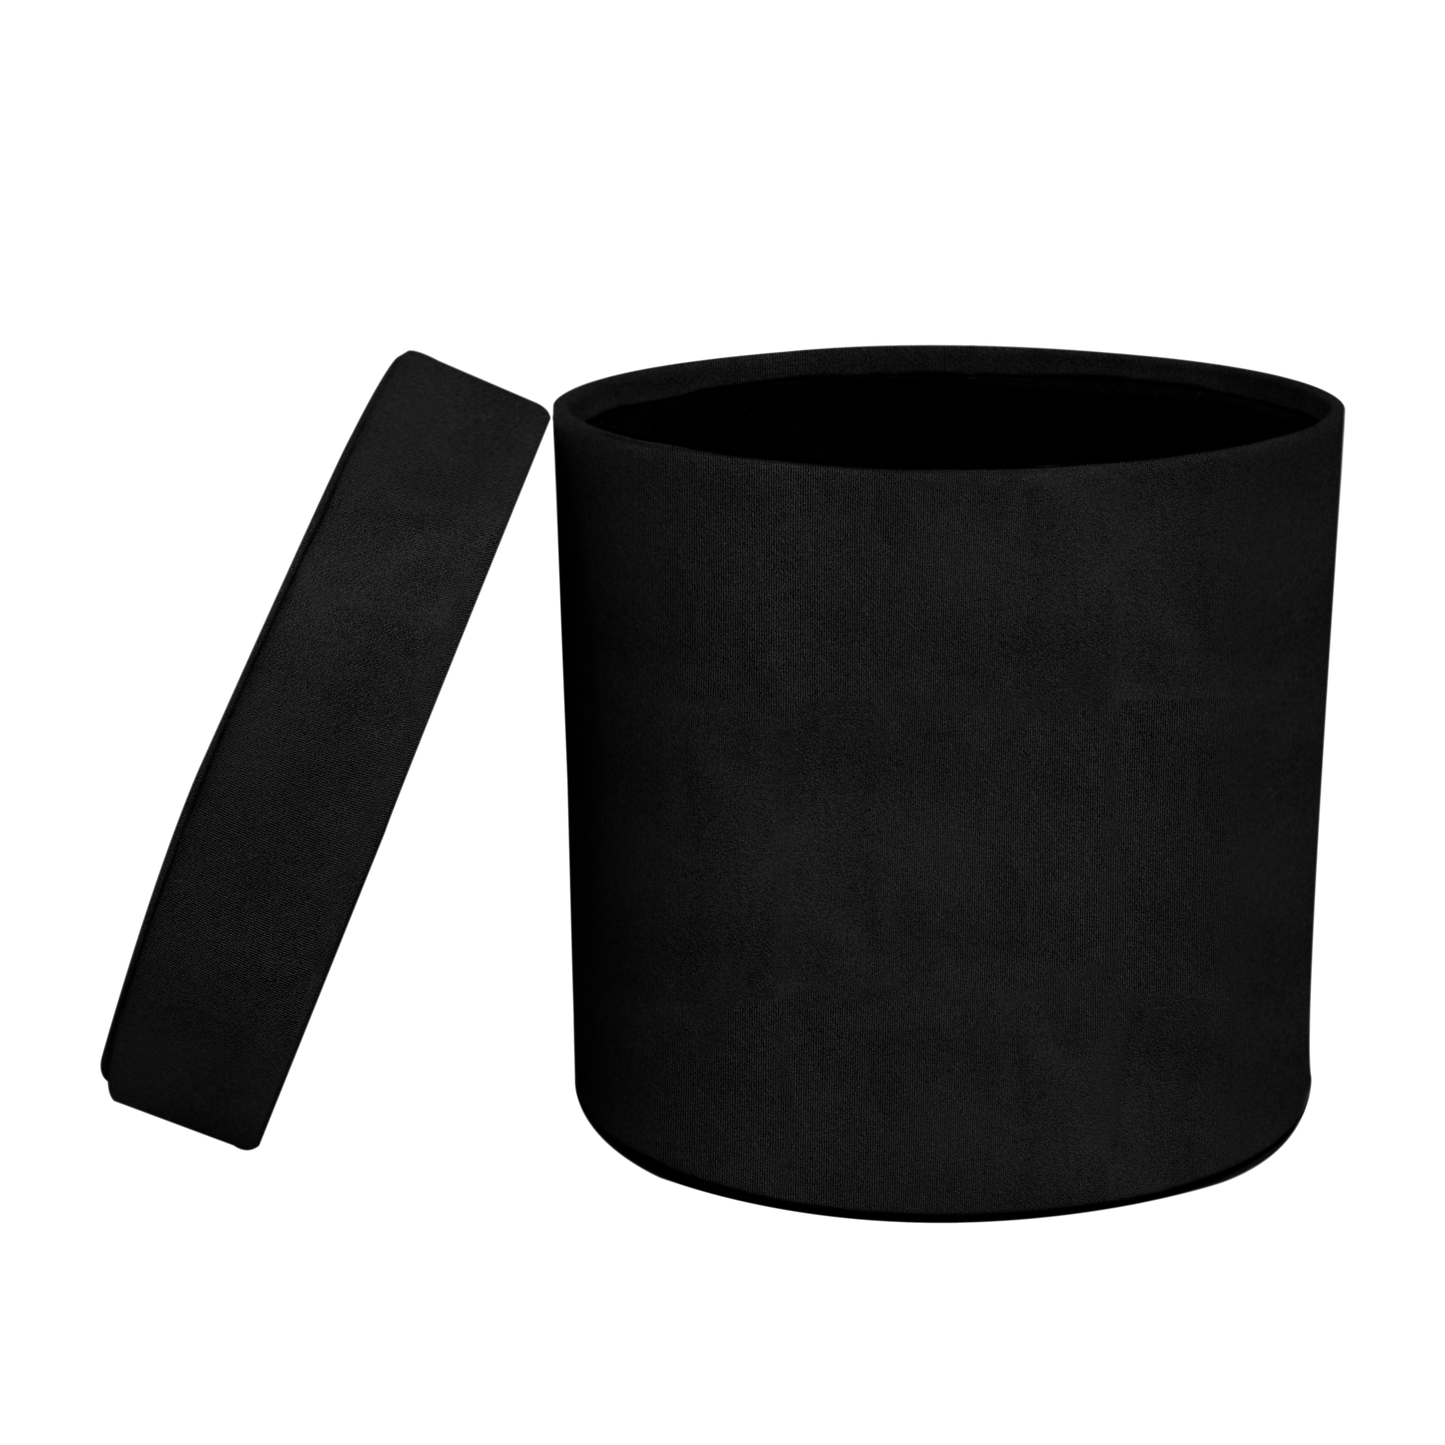 Kit 3 different sizes round shape boxes 3 in 1 - Suede Black